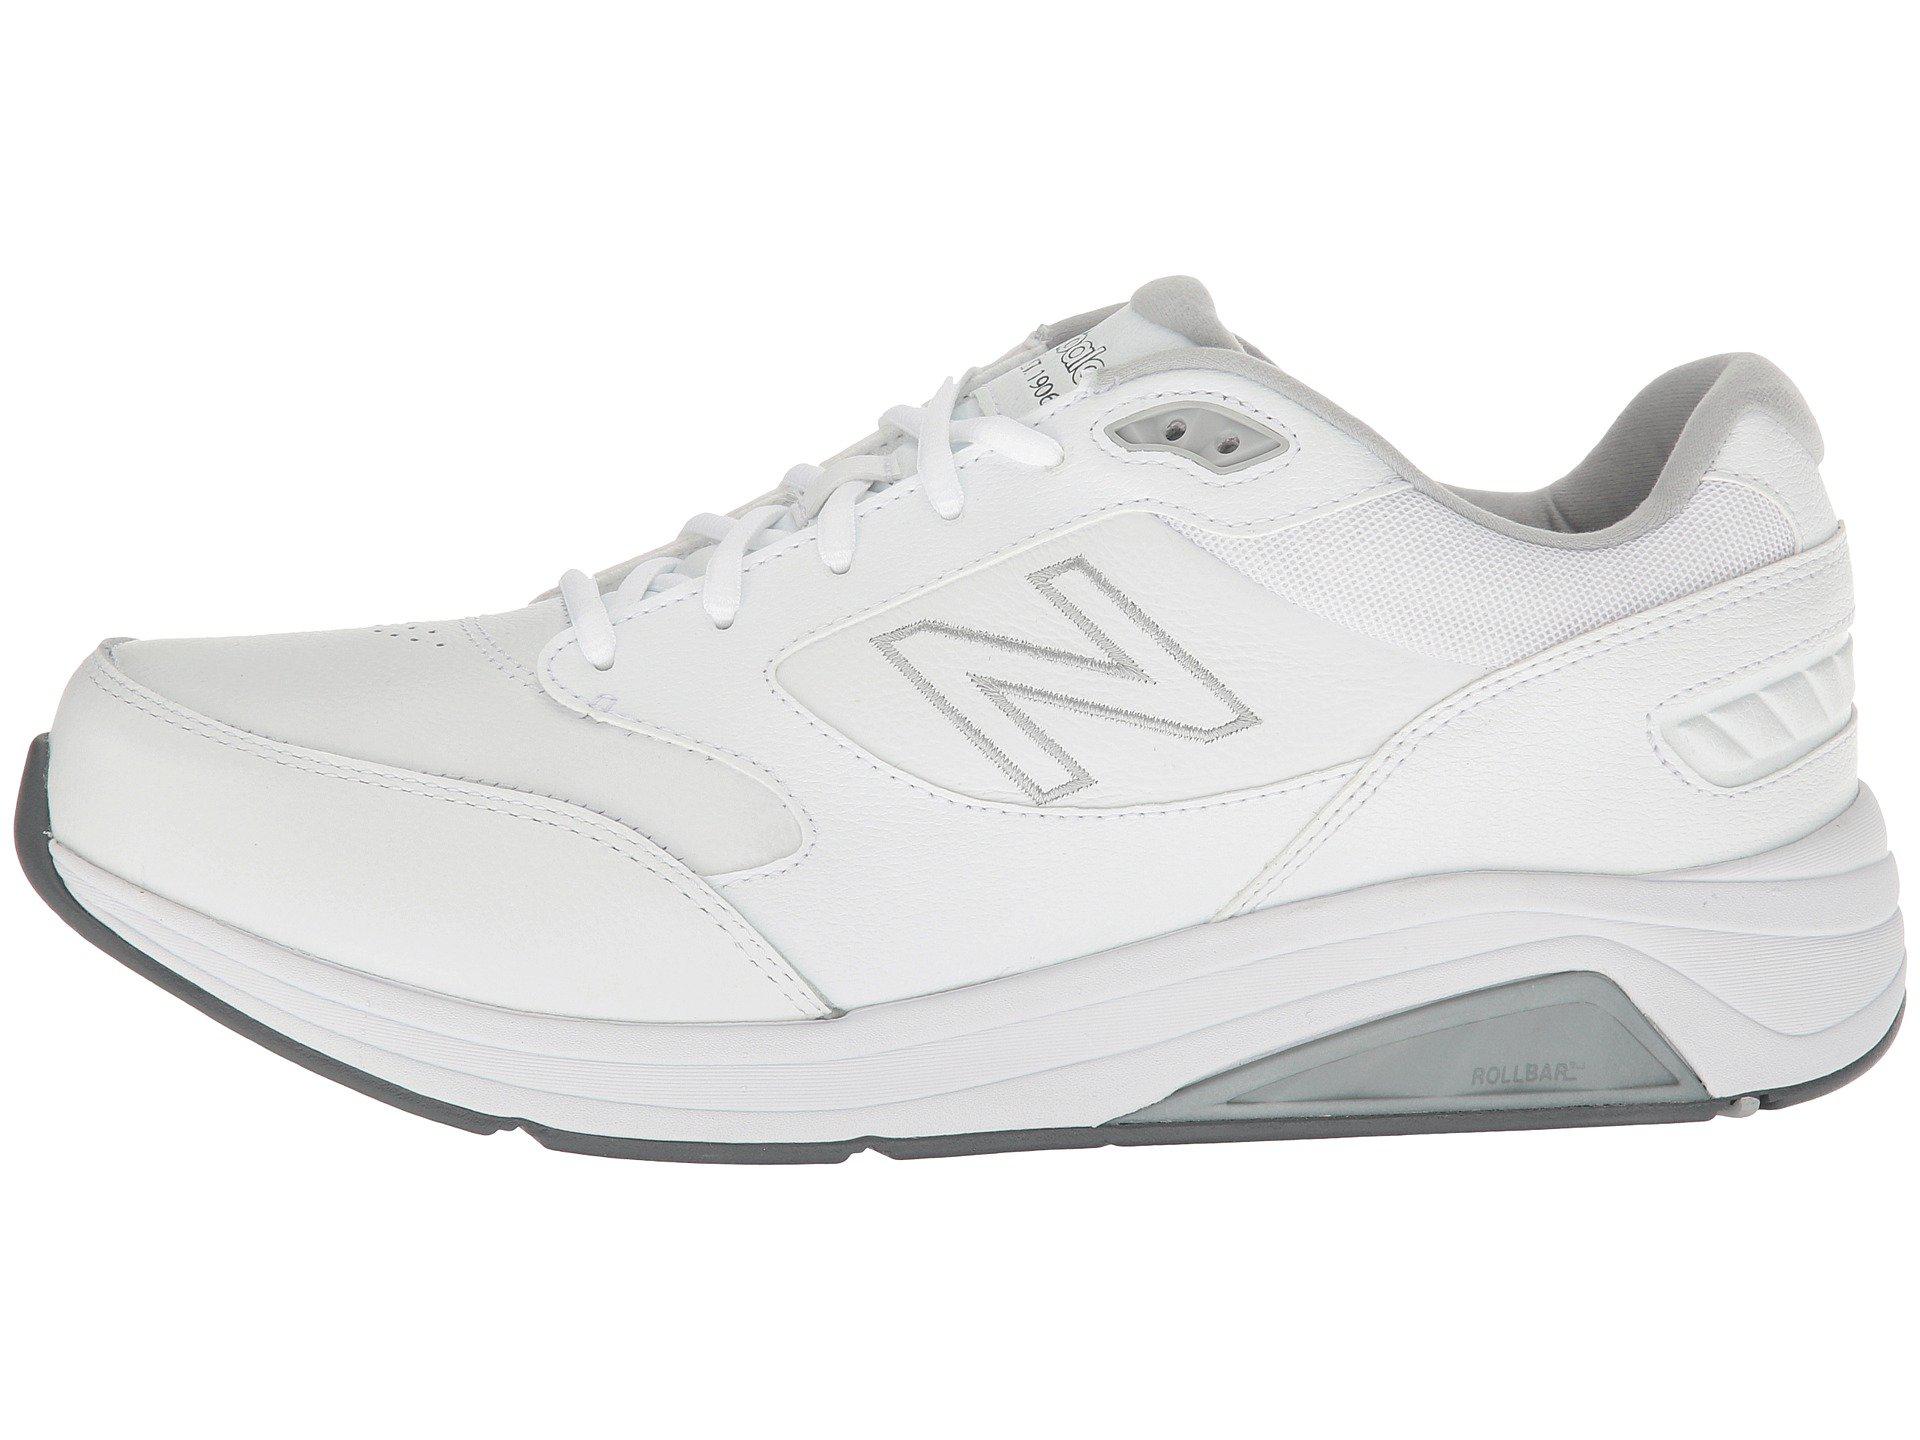 New Balance 928 Low Rise Hiking Boots in White for Men - Lyst